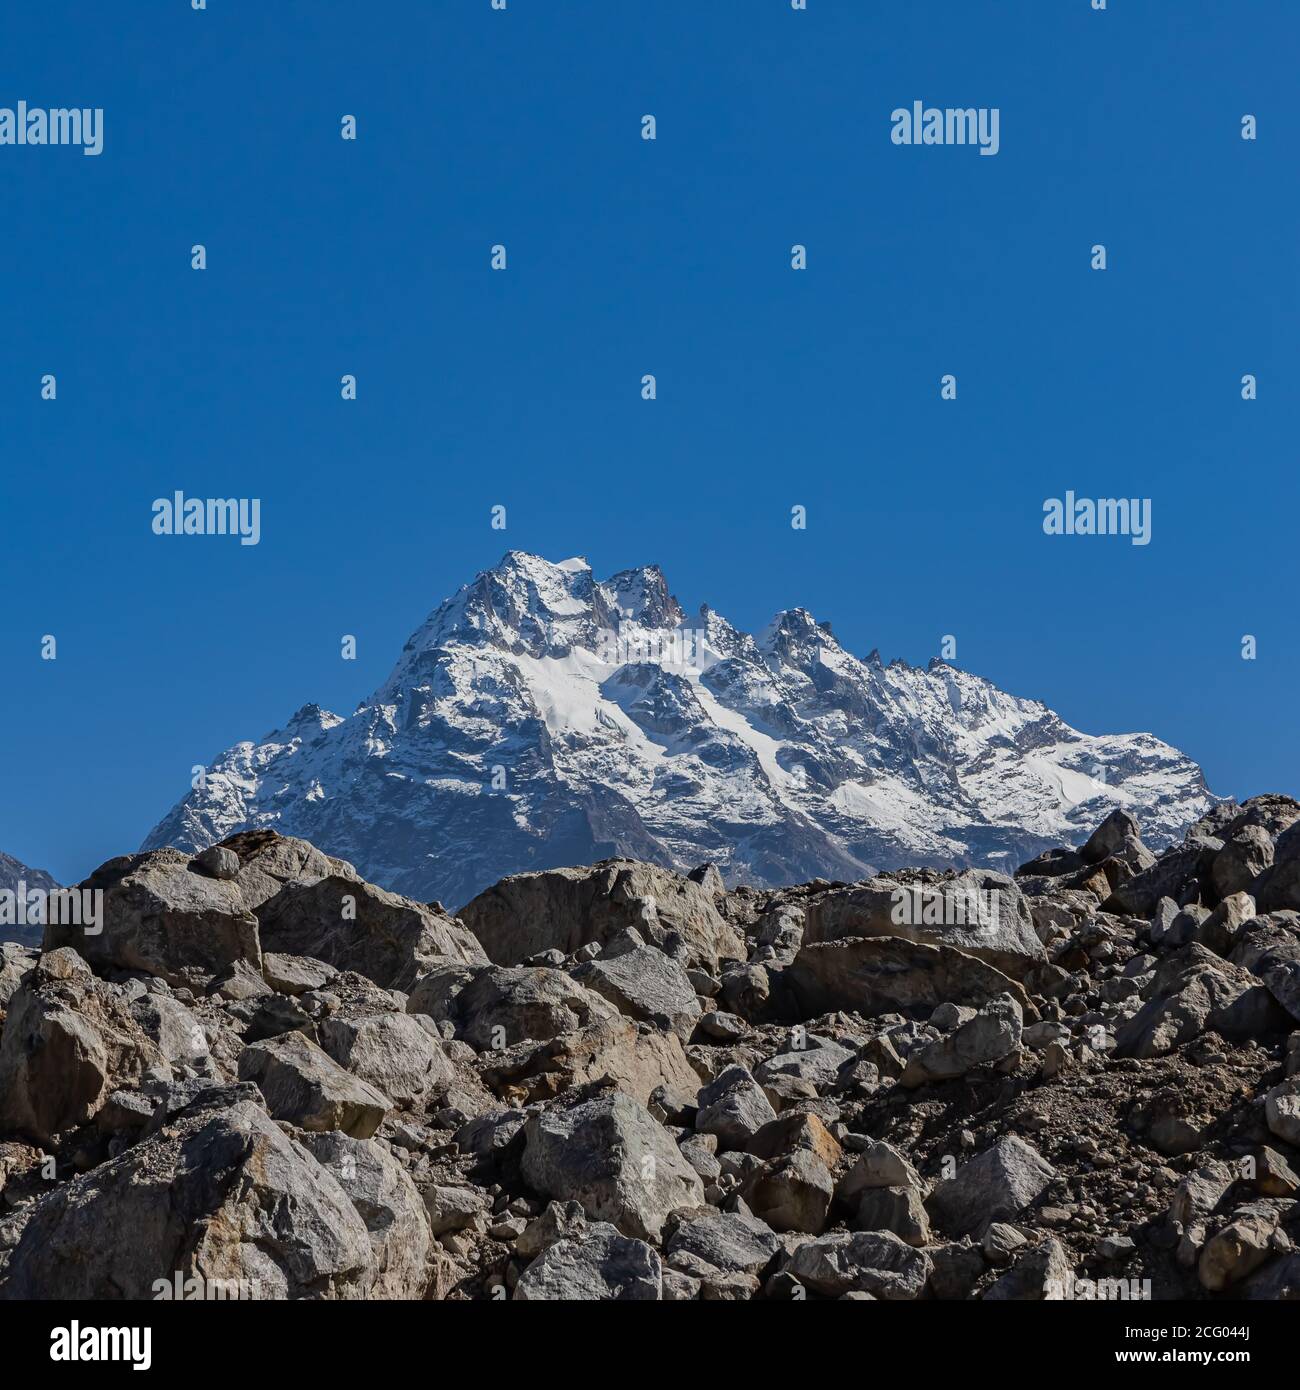 A postcard image of a majestic peak with blue sky on the horizon on the Tibetan plateau of Sikkim India Stock Photo